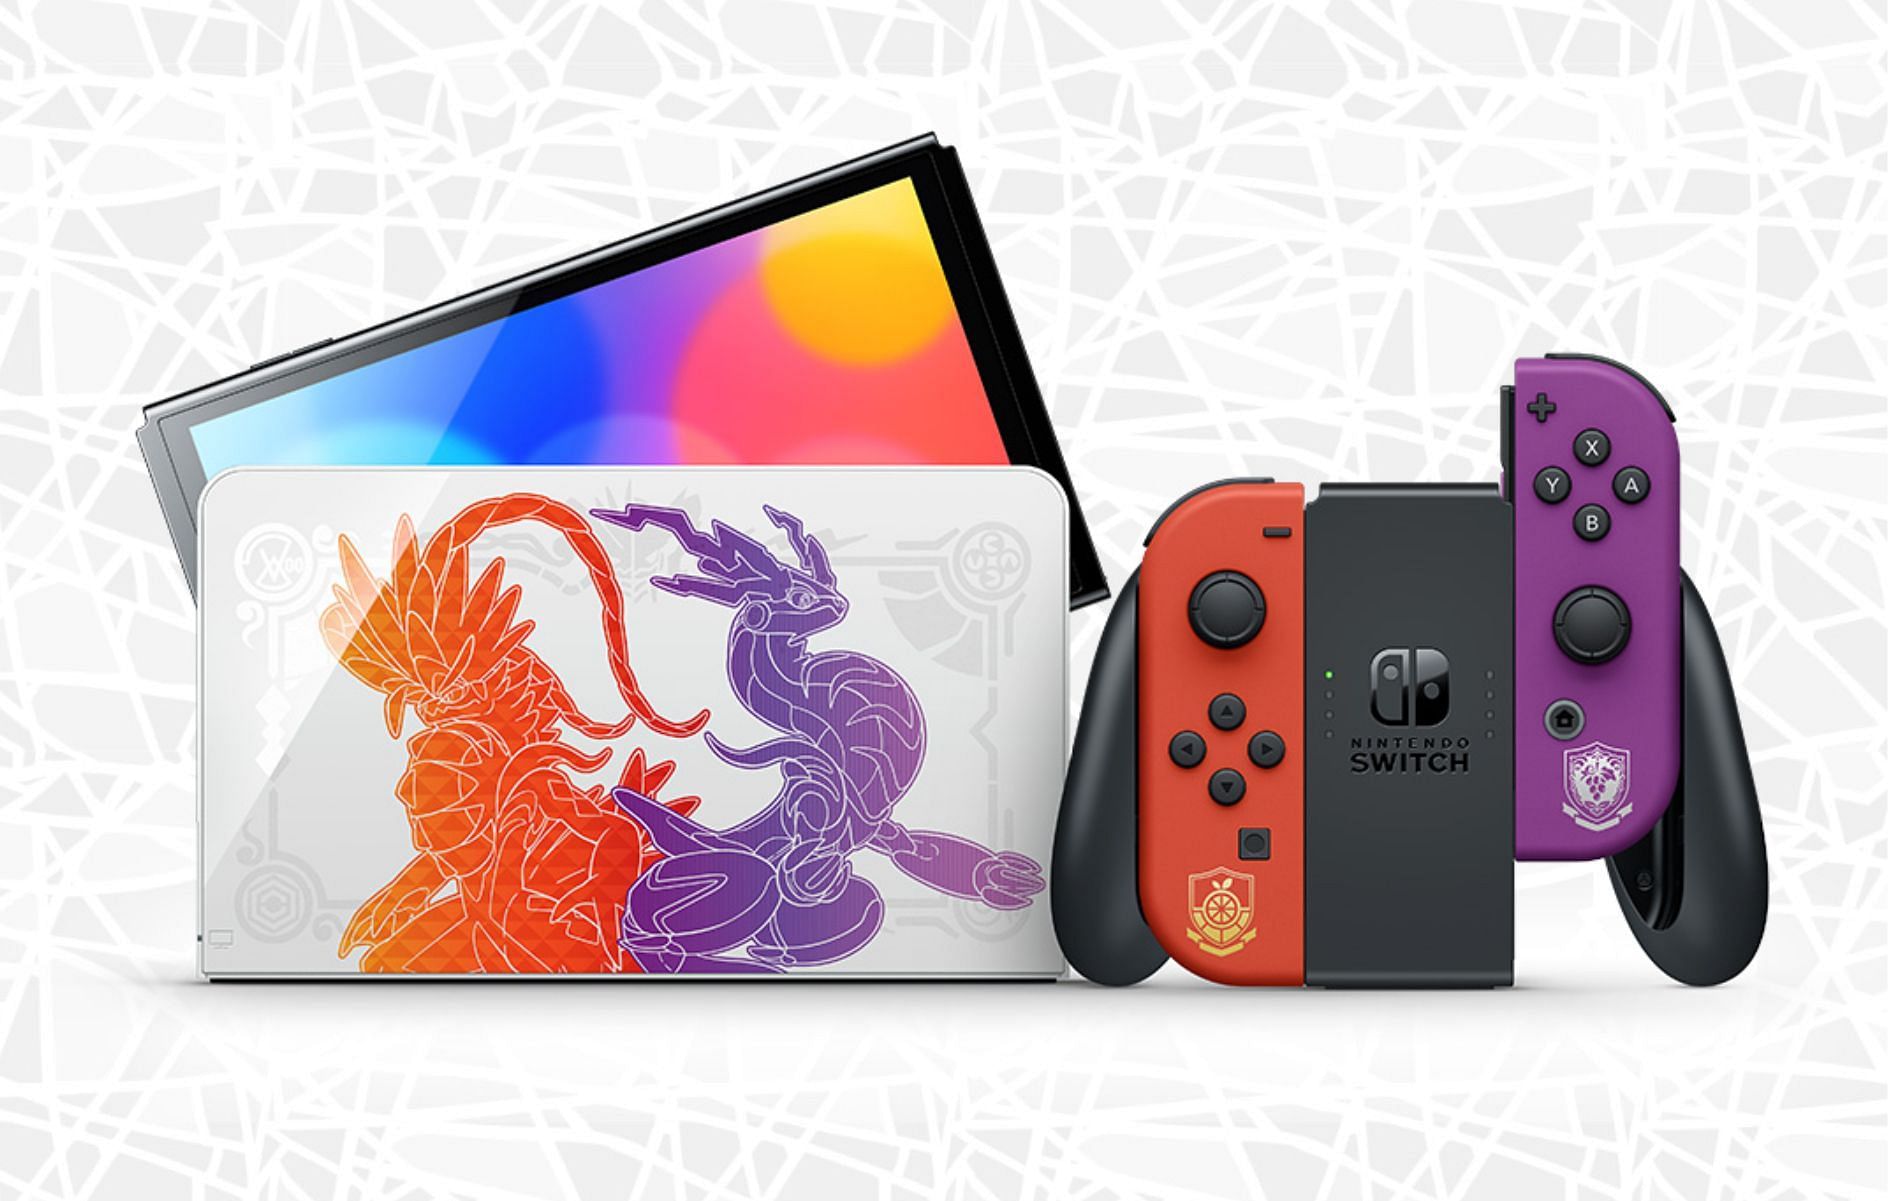 A brand new limited-edition Nintendo Switch is here (Image via Nintendo)